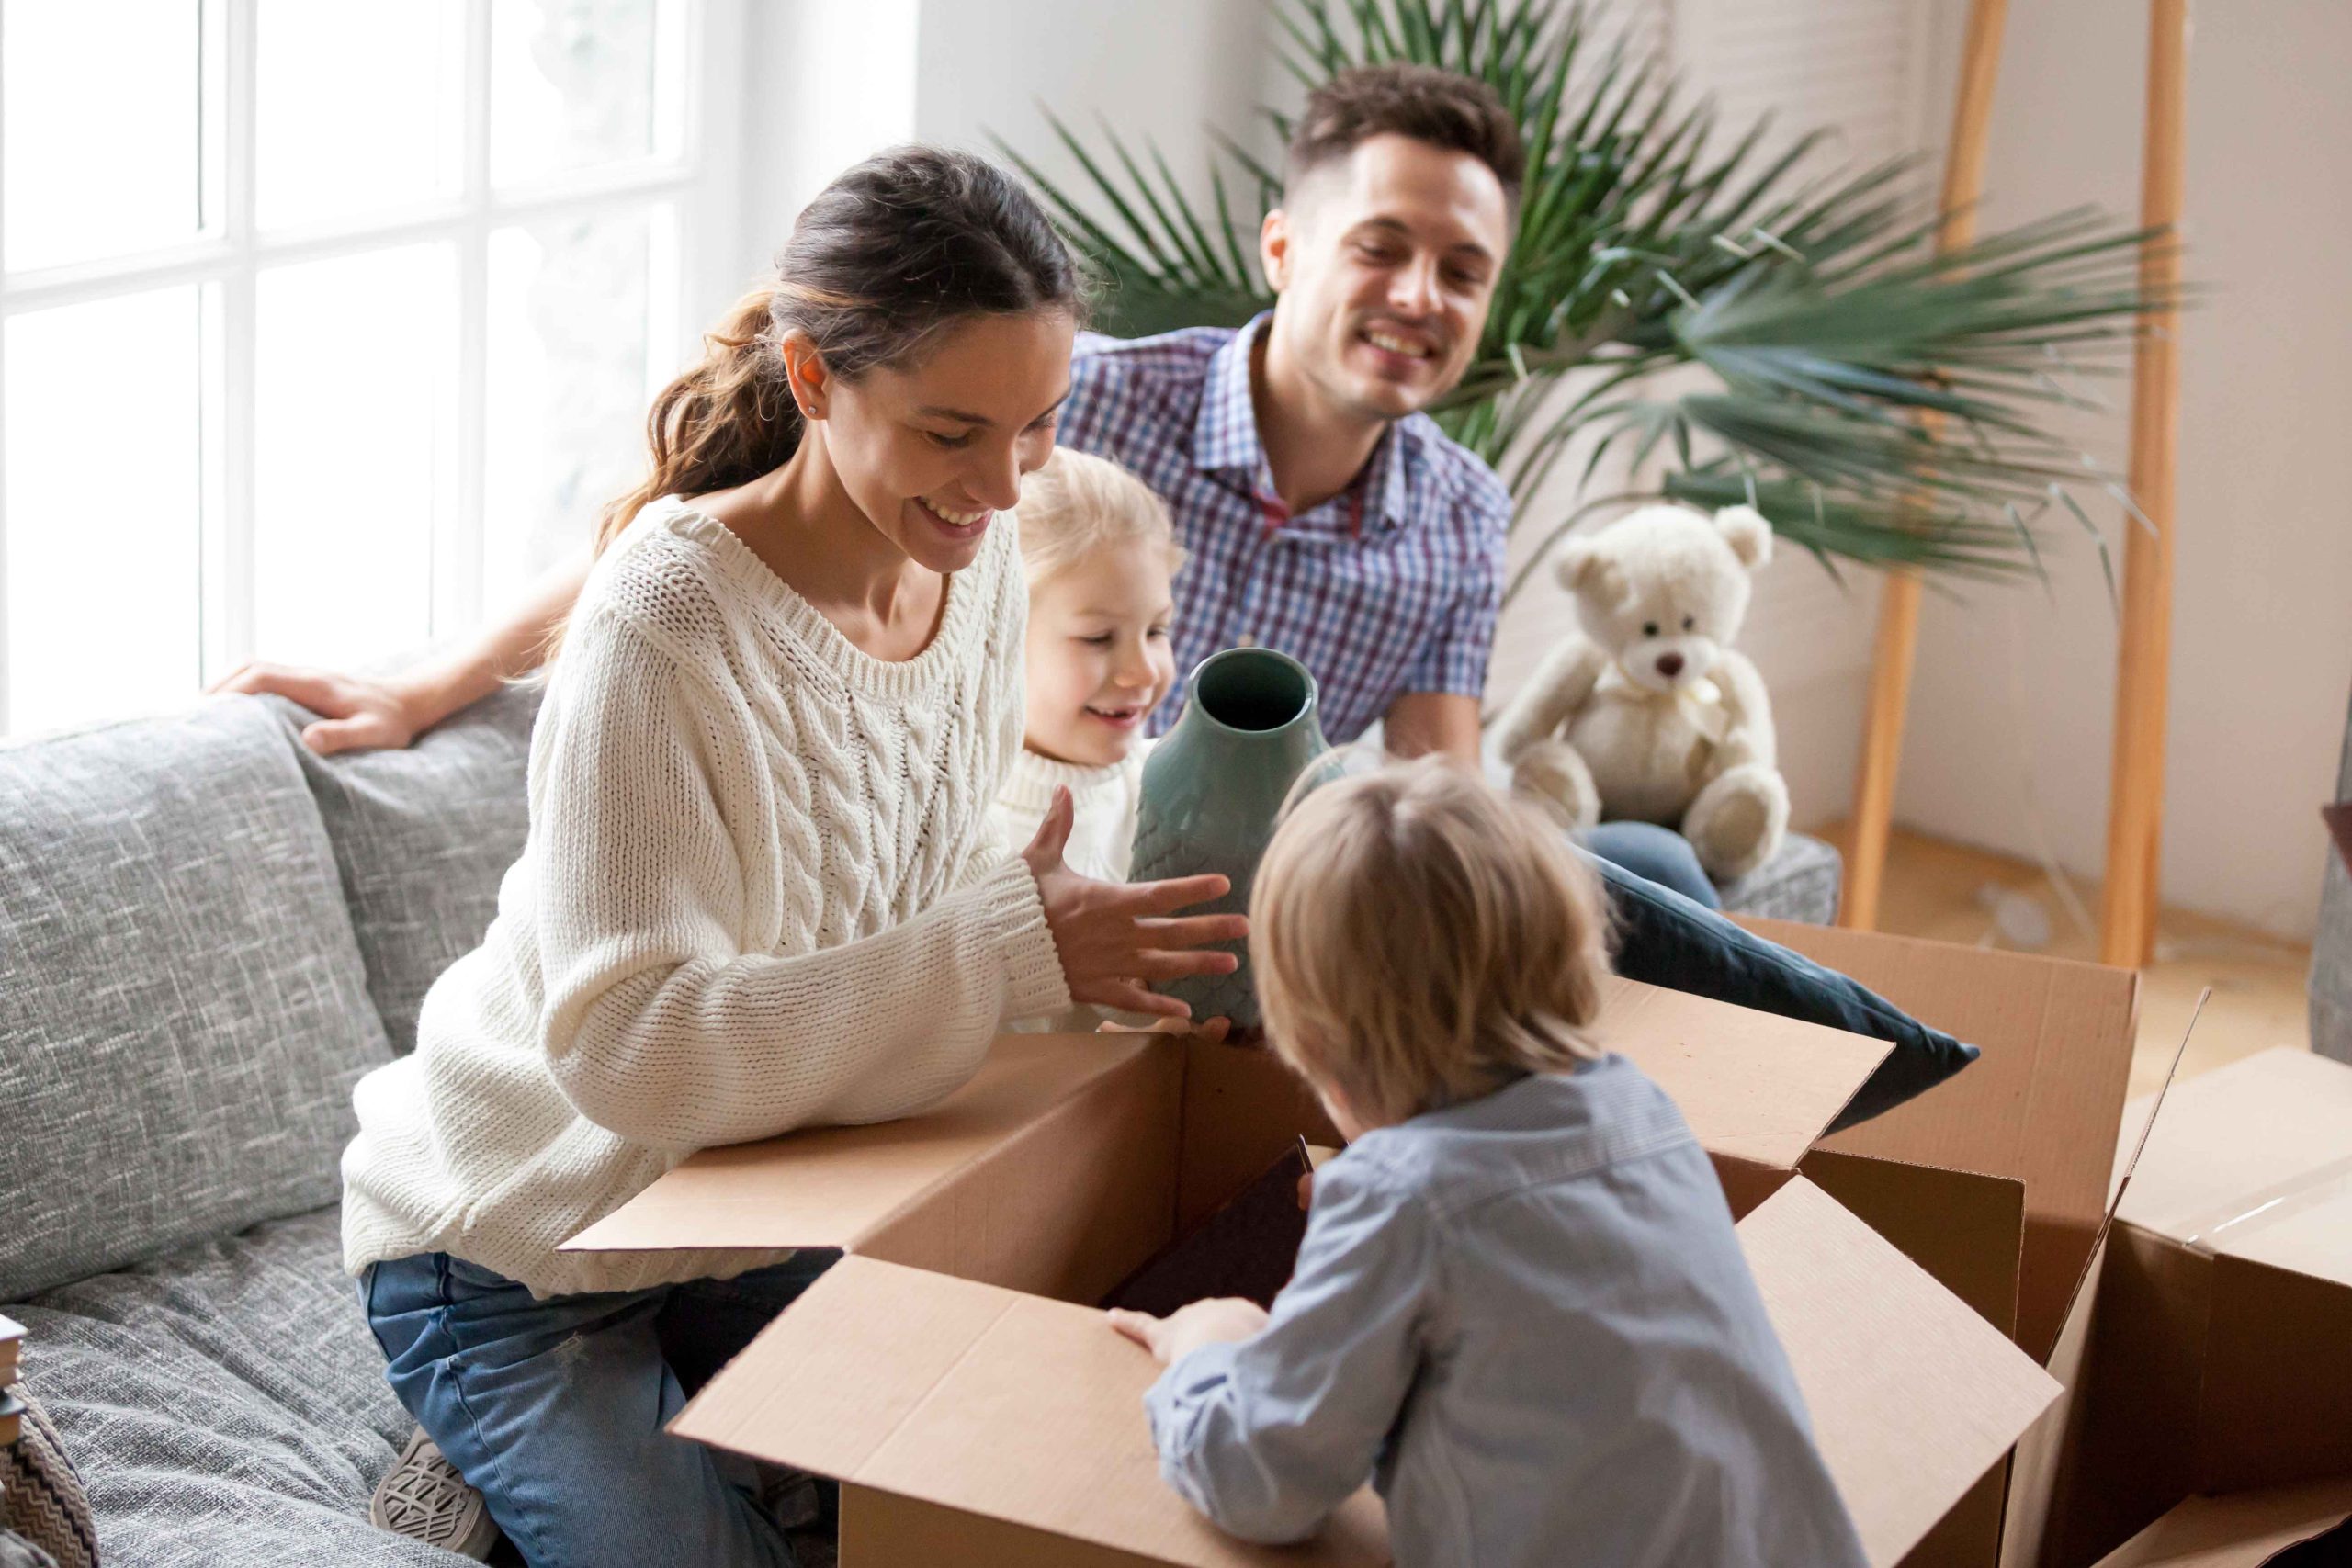 happy family with kids unpacking boxes moving into new home